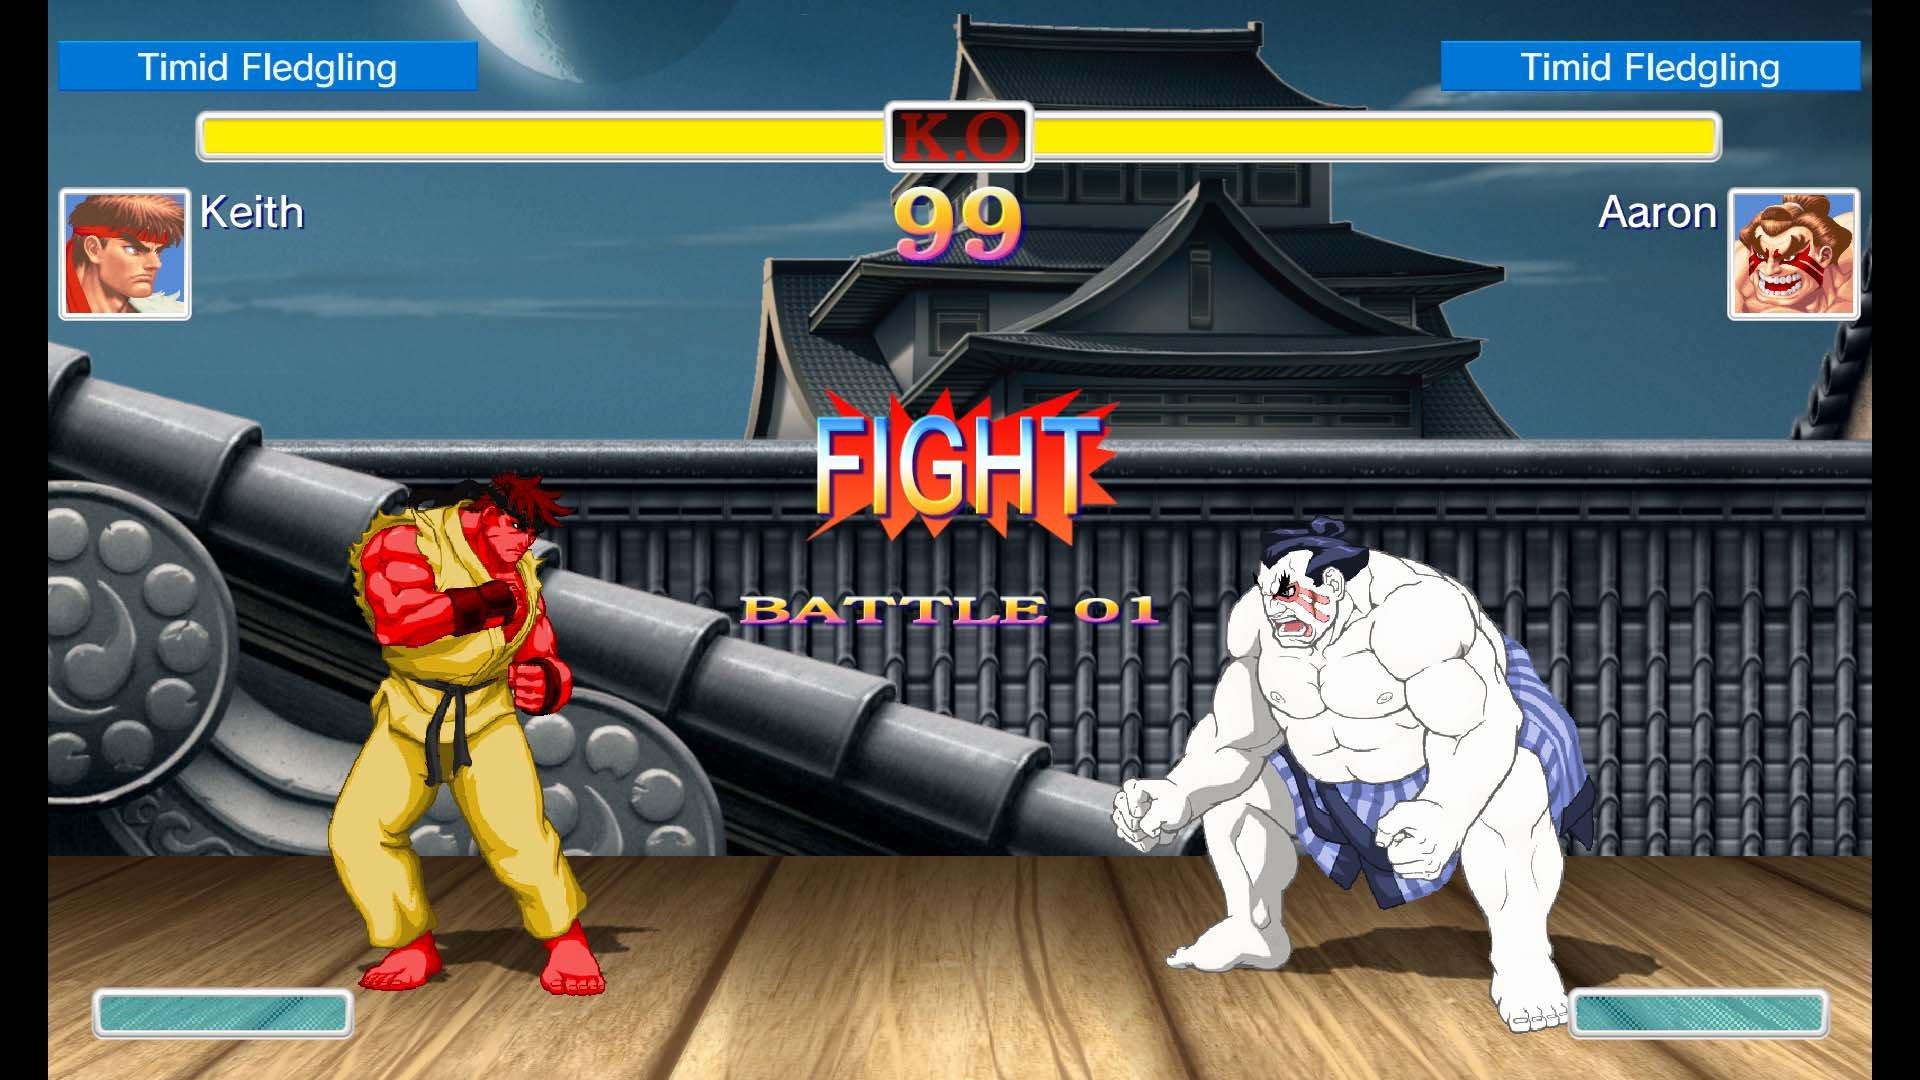 ultra street fighter ii the final challengers wii